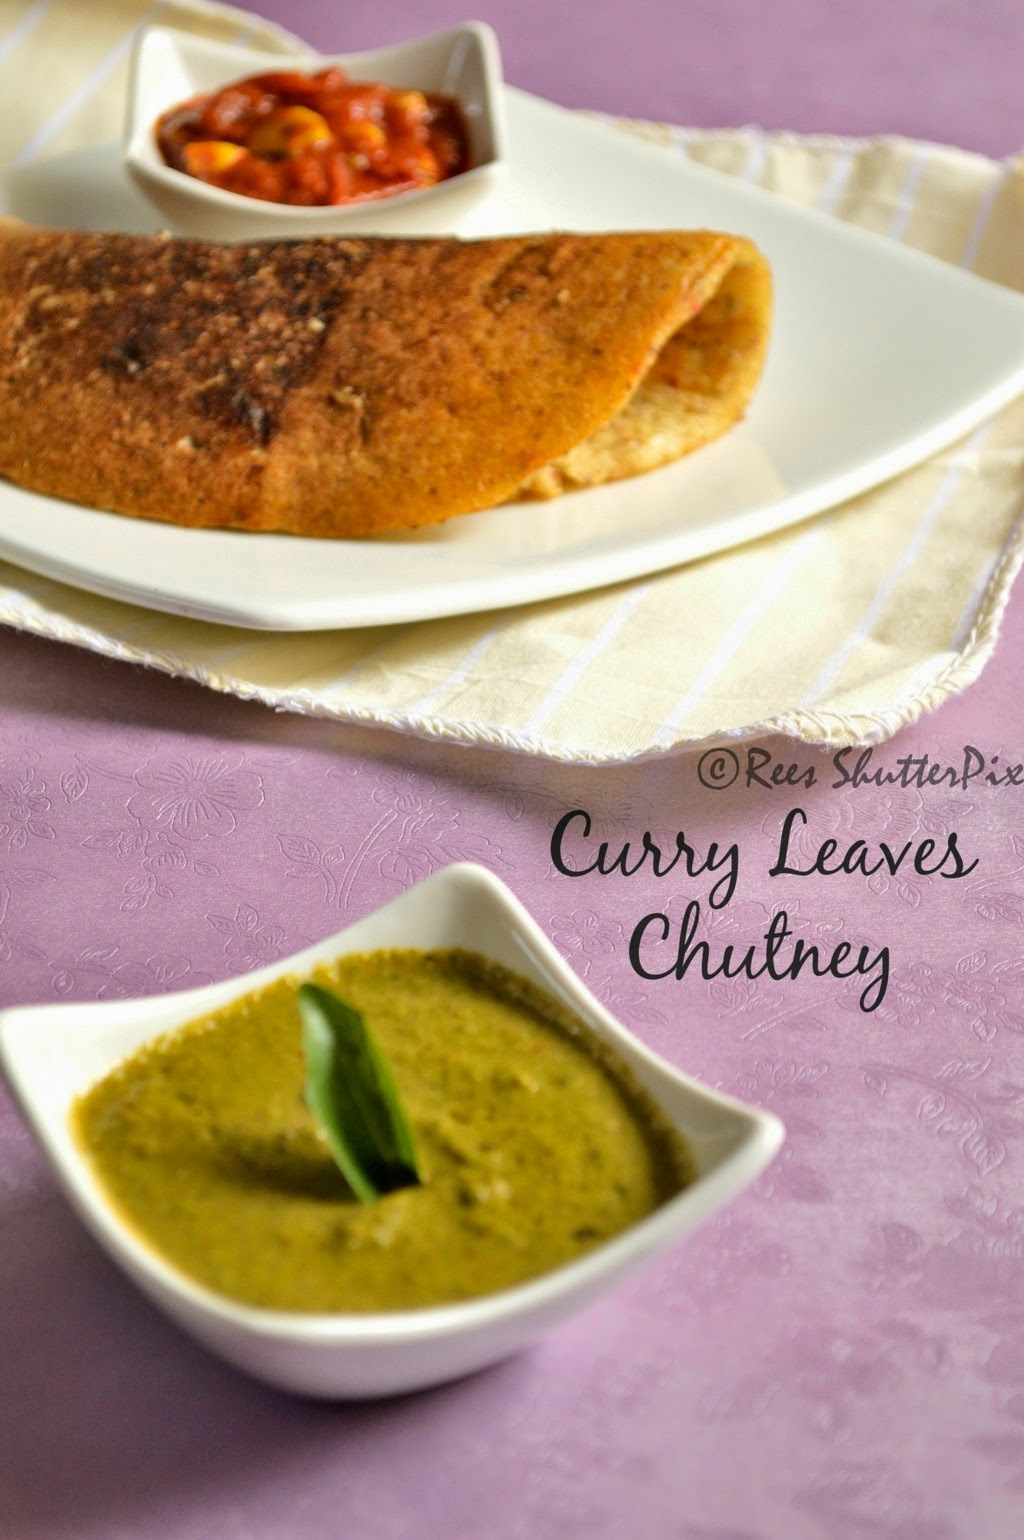 Chutney Varieties, Side dish Recipes, Curry Leaves Chutney Recipe, Idli Dosa Side Dish Recipes, 